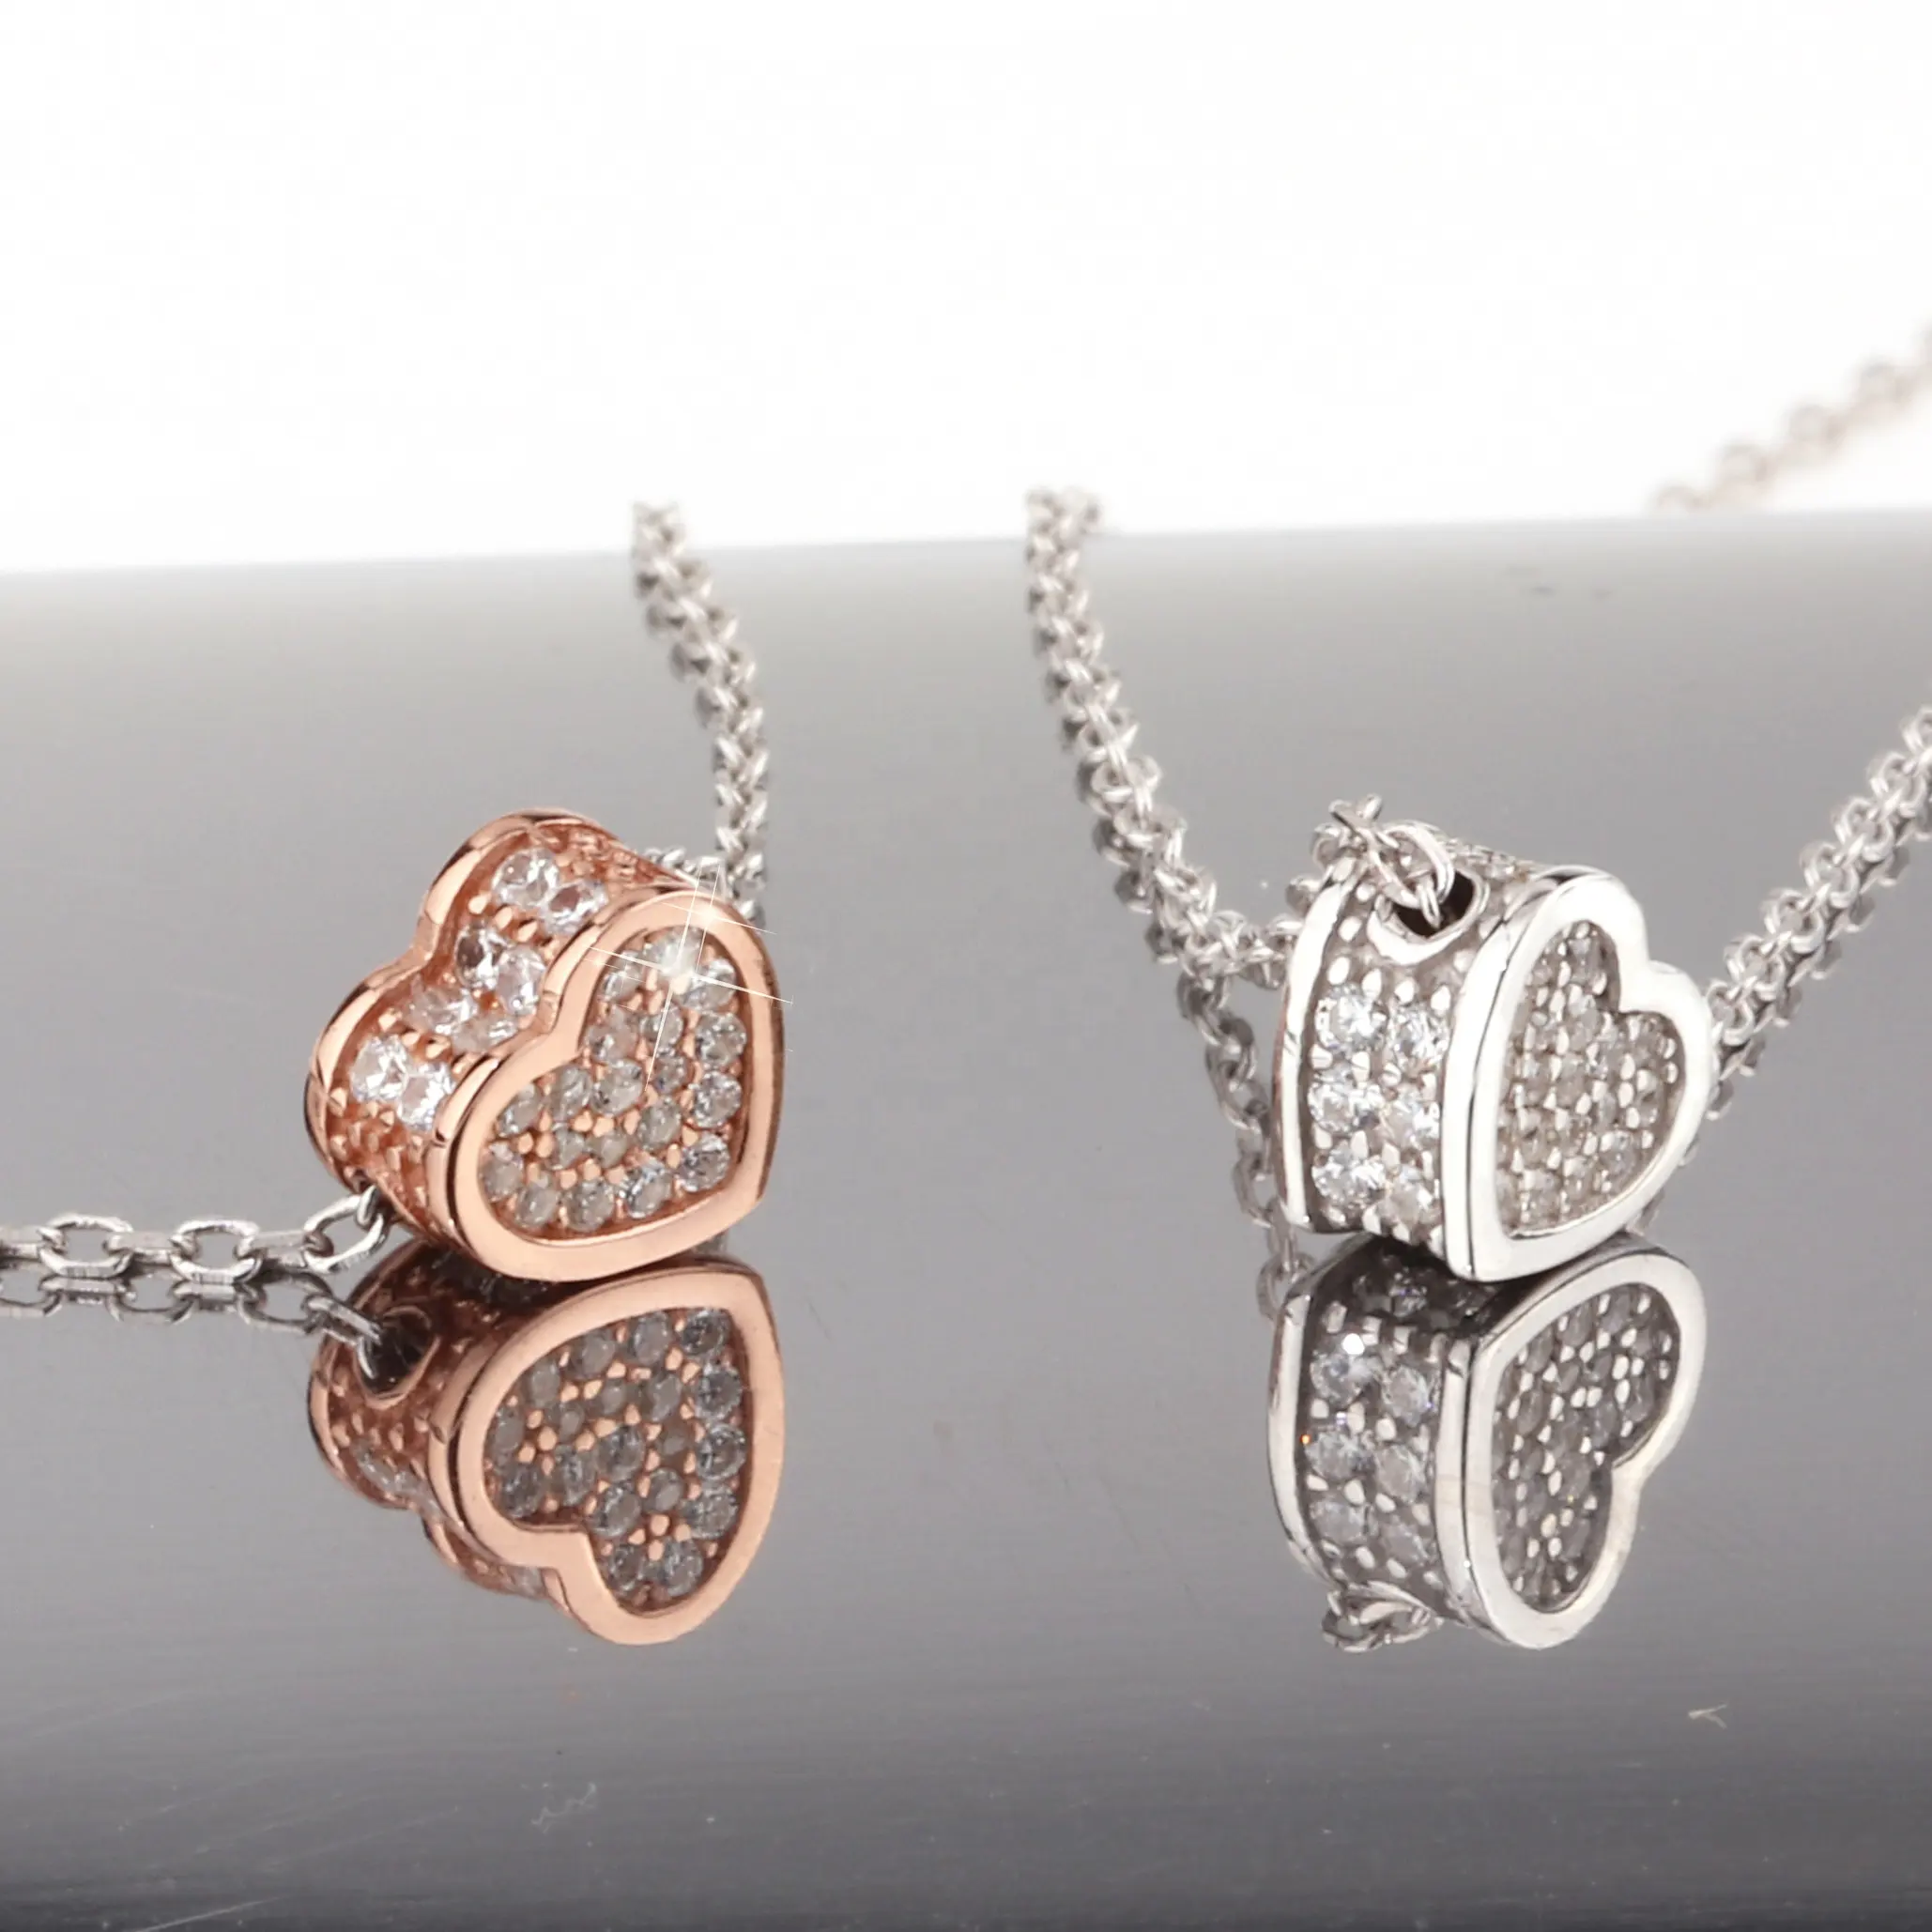 Silver jewelry set 925 sterling silver heart pendant necklace cubic zirconia silver heart gold plated 925 jewelry necklace heart